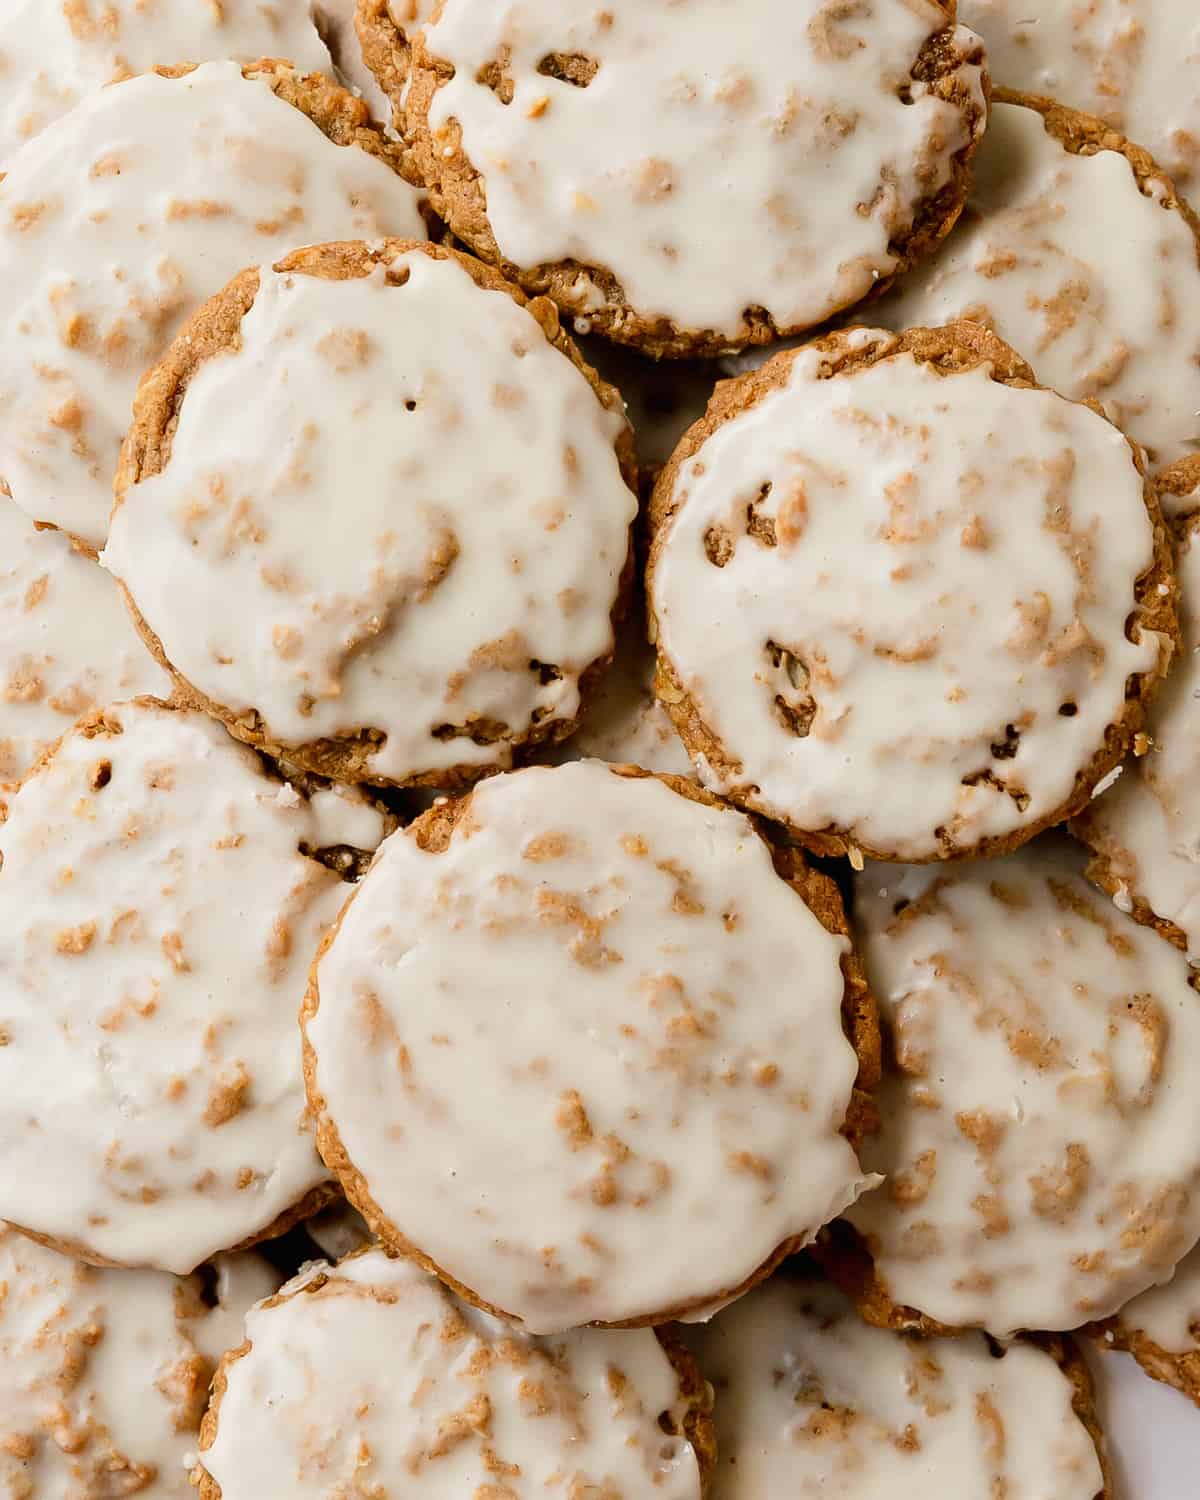 Iced oatmeal cookies are soft and chewy cookies filled with cozy spices, topped with a vanilla icing.  What I love most about these frosted oatmeal cookies are that they require no chill chilling time and are super easy to make. These old-fashioned oatmeal cookies are the perfect cozy cookie everyone will love!